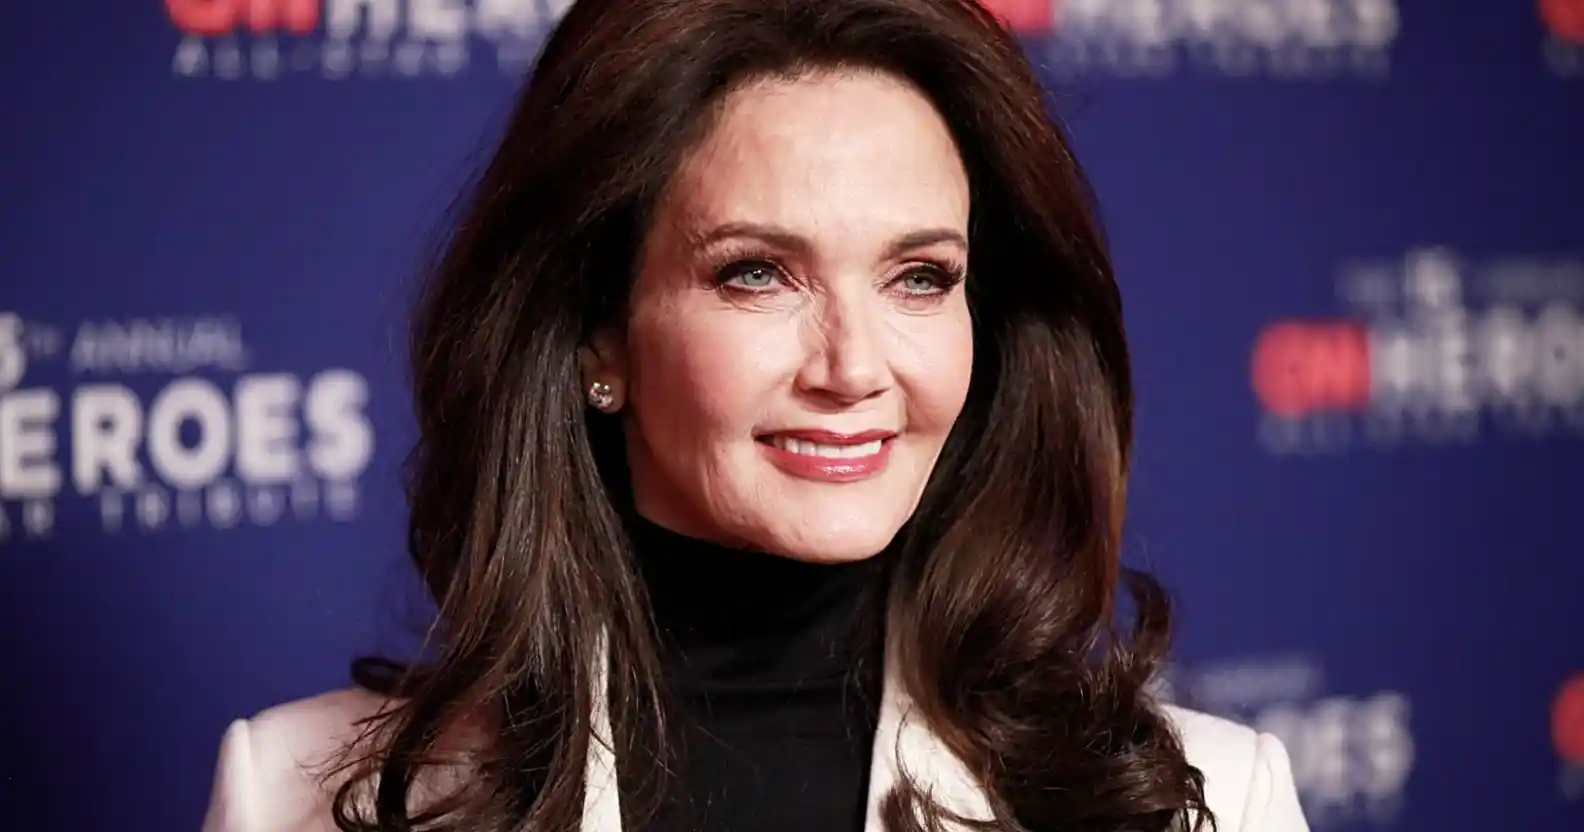 Lynda Carter wearing a grey suit and black turtleneck on a red carpet.